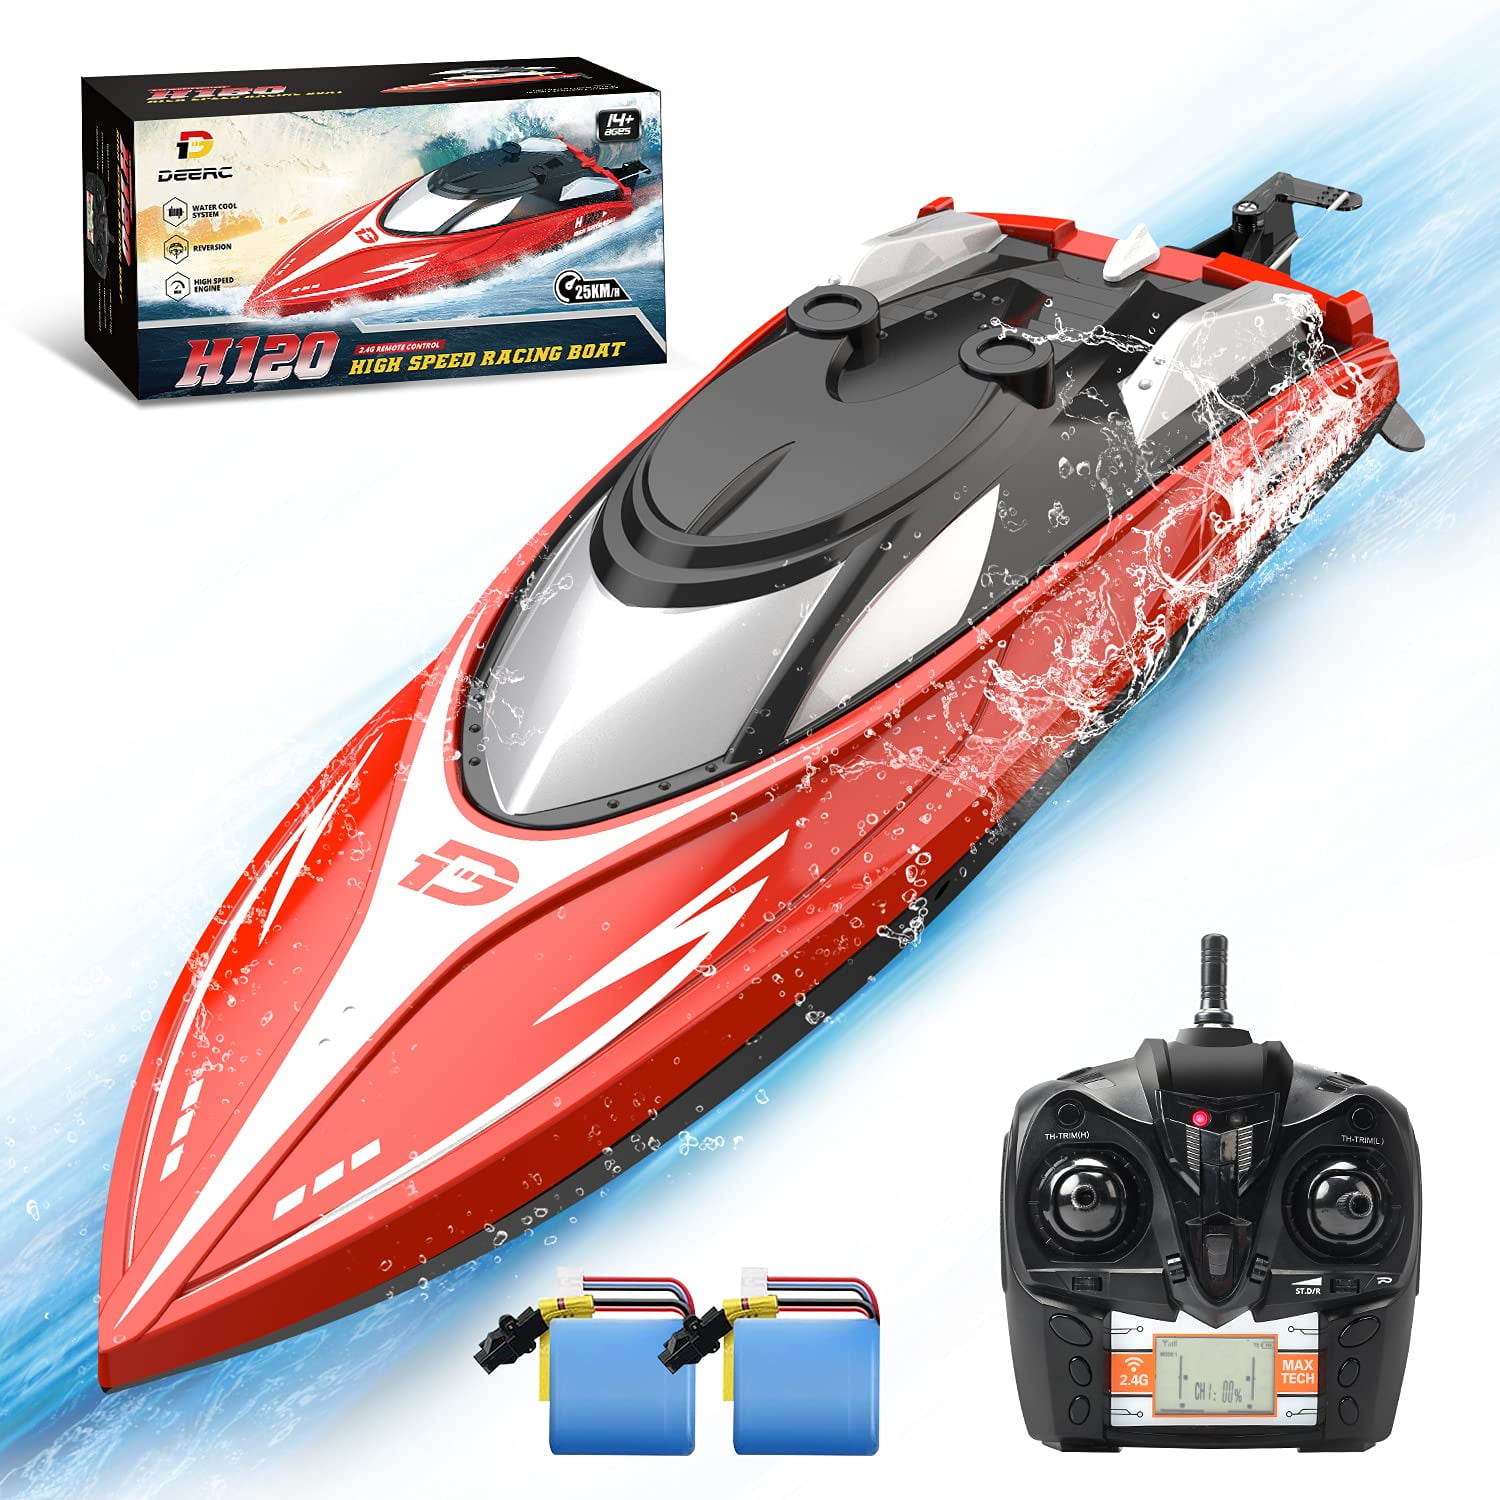 Tbest Remote Control Toy Boat,25km/h High Speed Remote Control Boats 4 Channel 2.4GHz Racing Speedboat Model Toy Ship for Pools and Lakes Christmas Birthday Gift for Boys Girls Kids